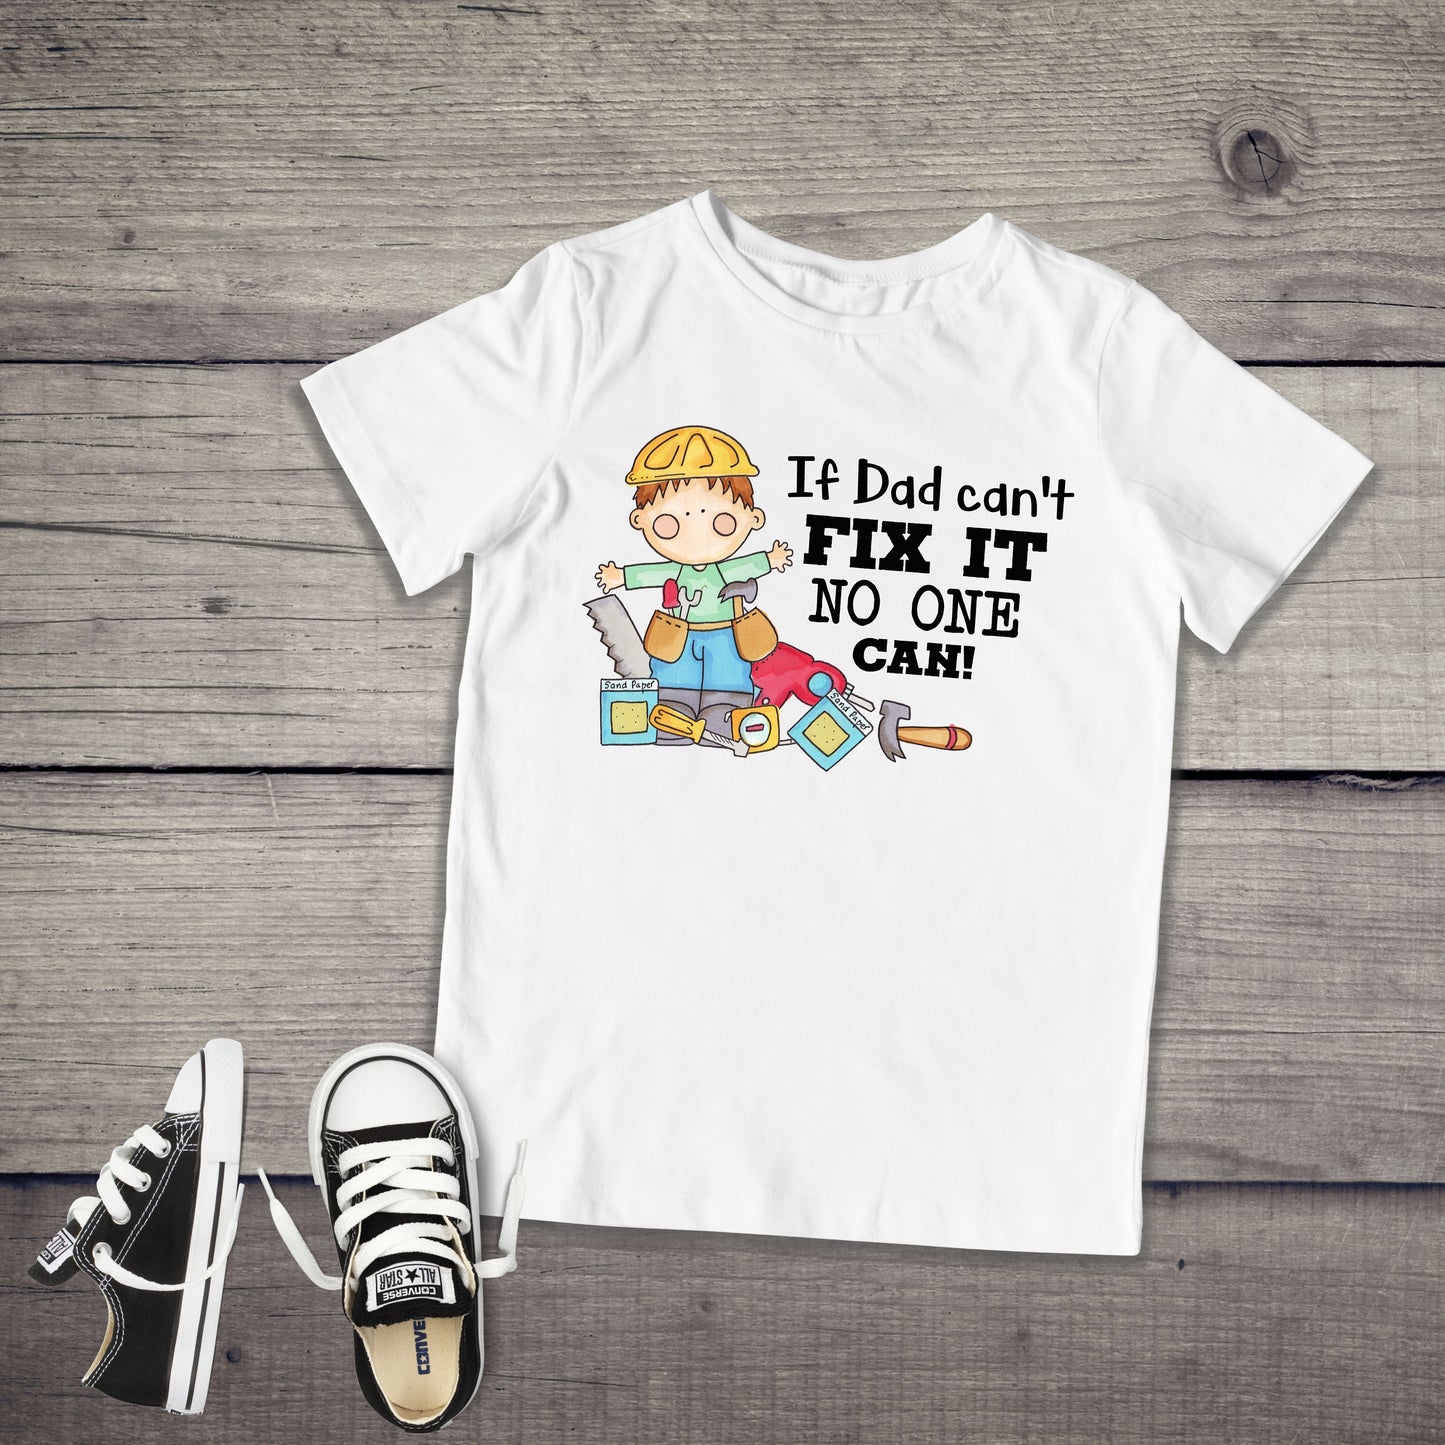 If Dad Can't Fix It No One Can Infant or Toddler Shirt or Bodysuit - daddy shirt - gifts for dad 